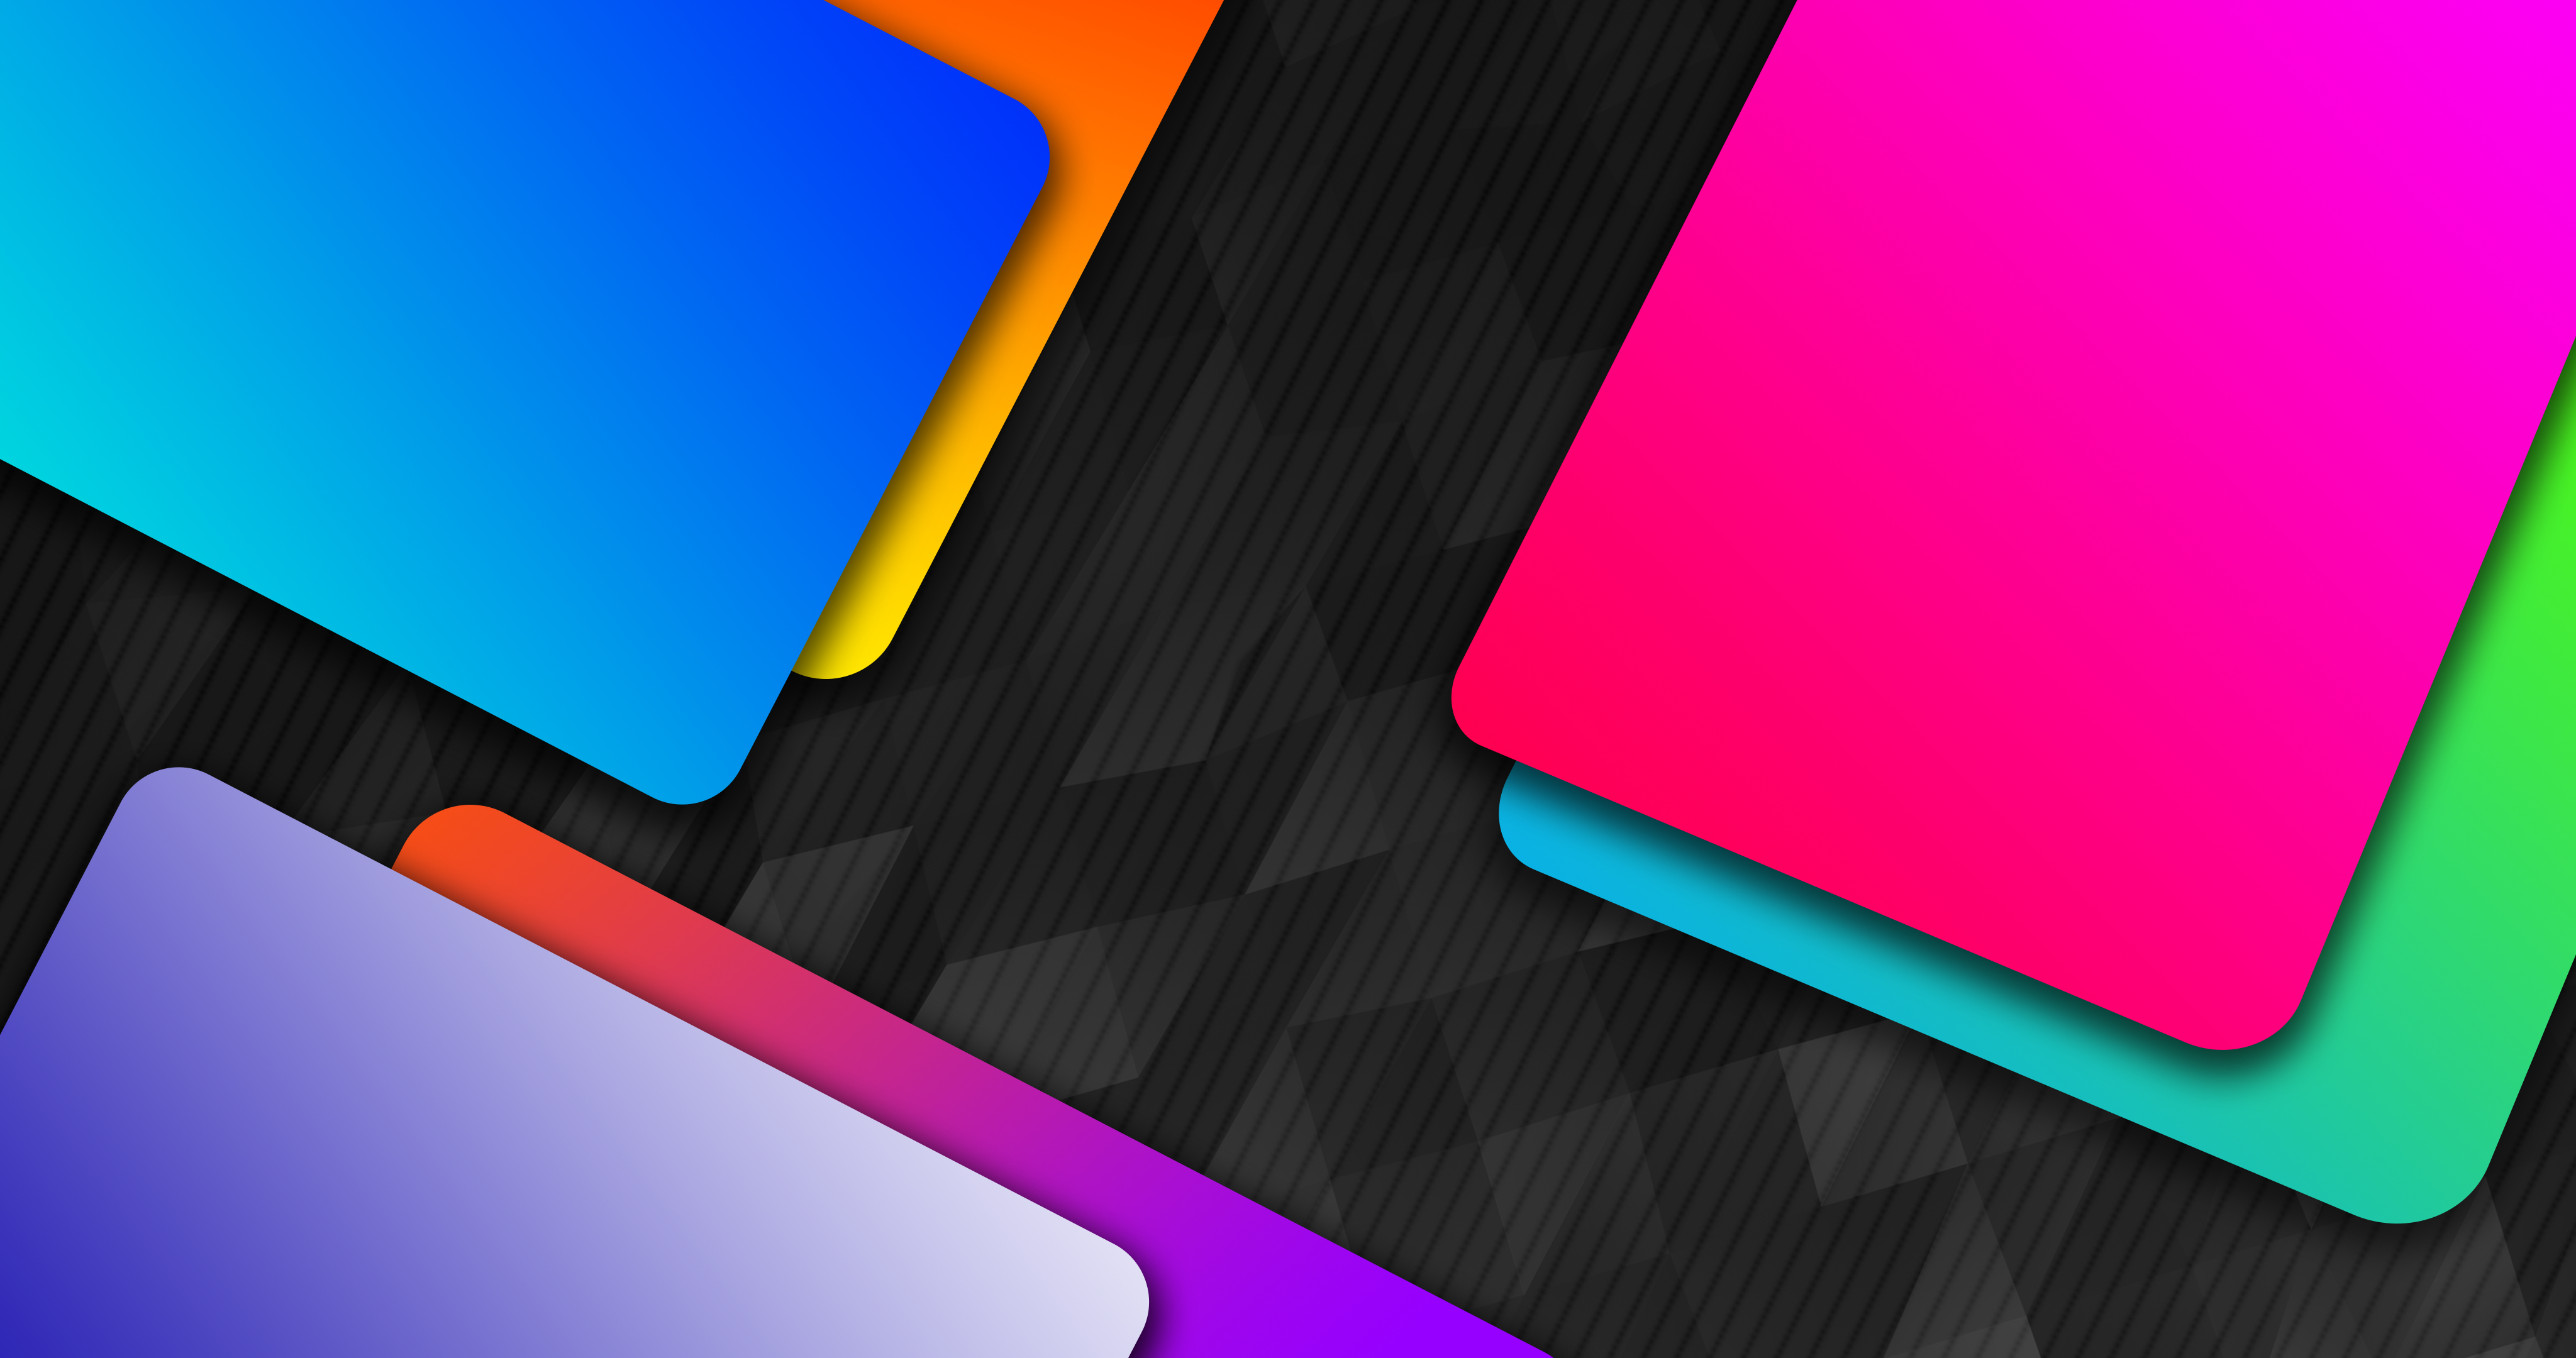 Colorful Gradient New Shapes Wallpaper, HD Artist 4K Wallpapers, Images